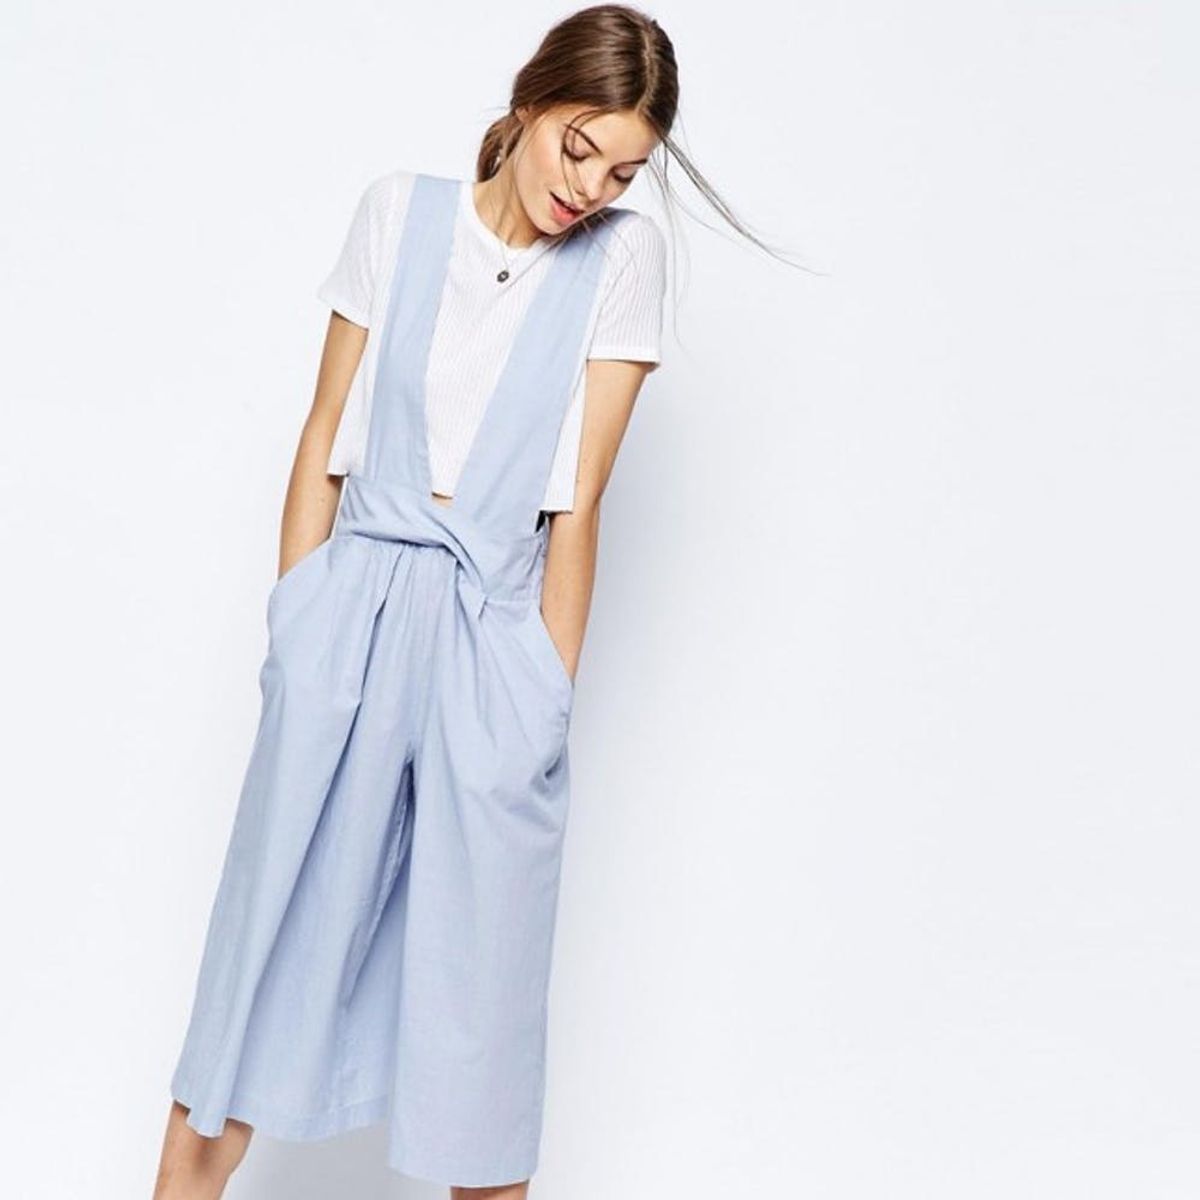 From Anthro to Zara: 28 Spring Outfit Essentials Under $100